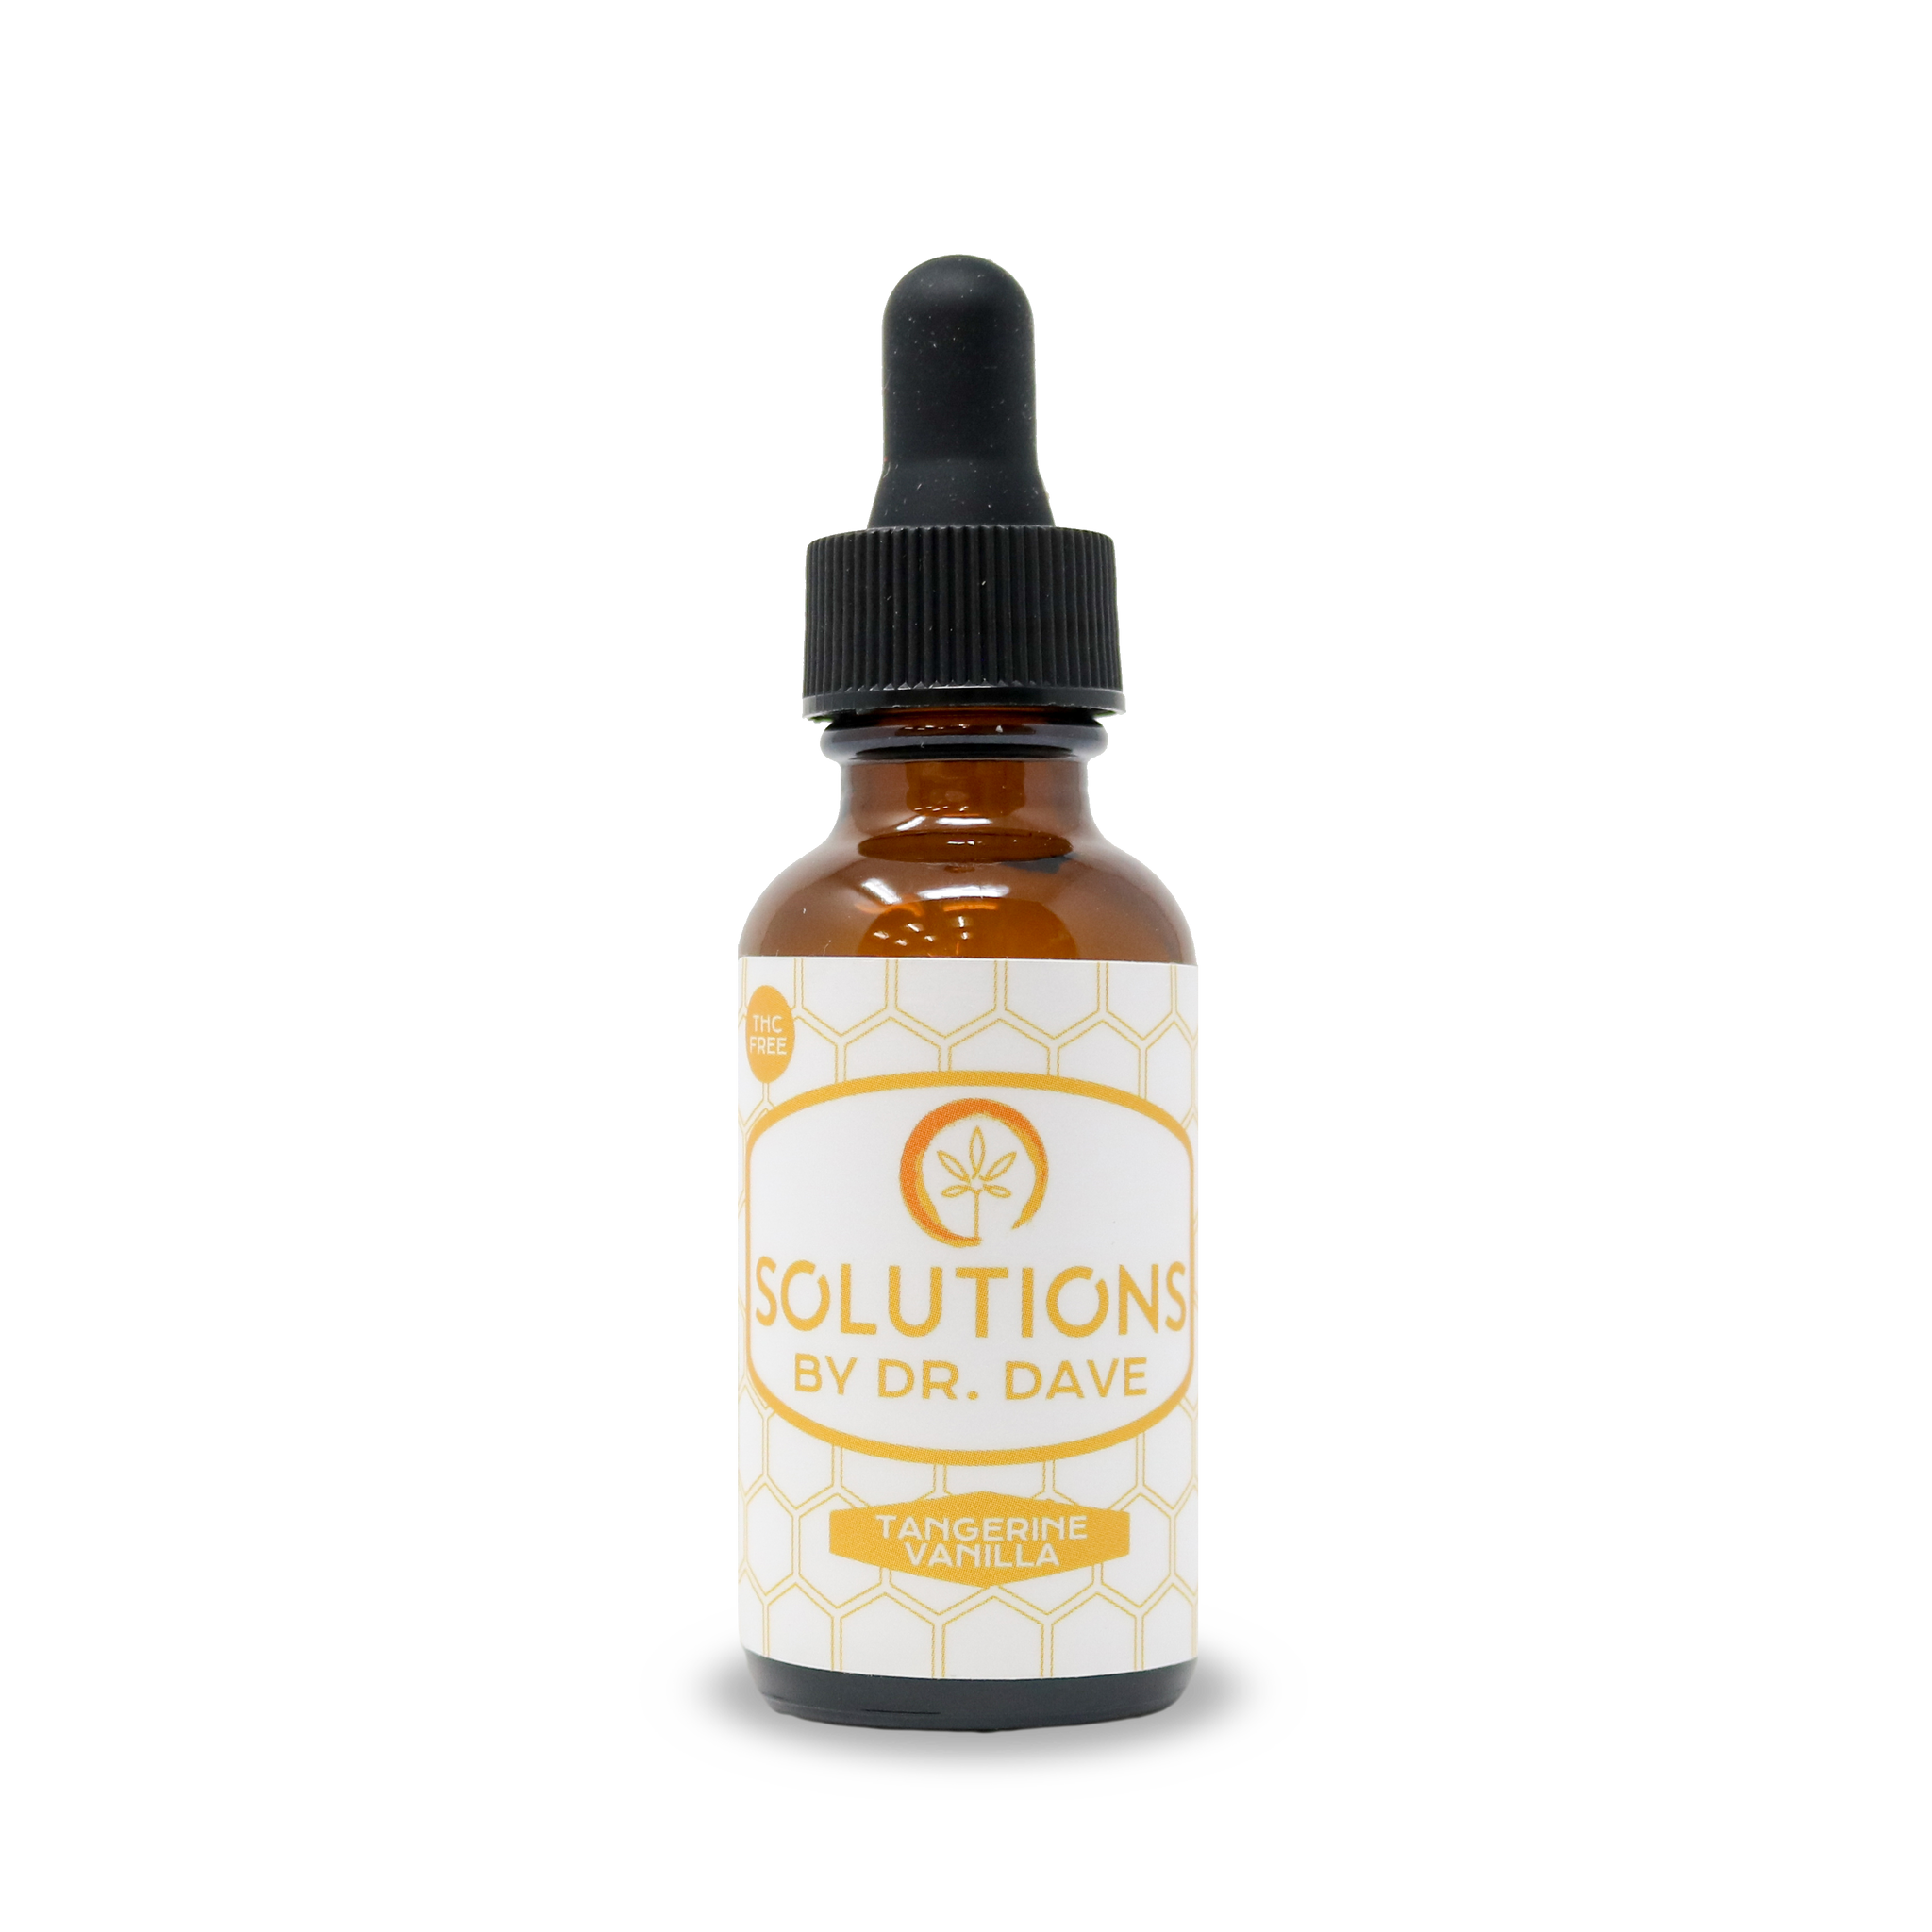 Solutions By Dr. Dave - CBD Tinctures